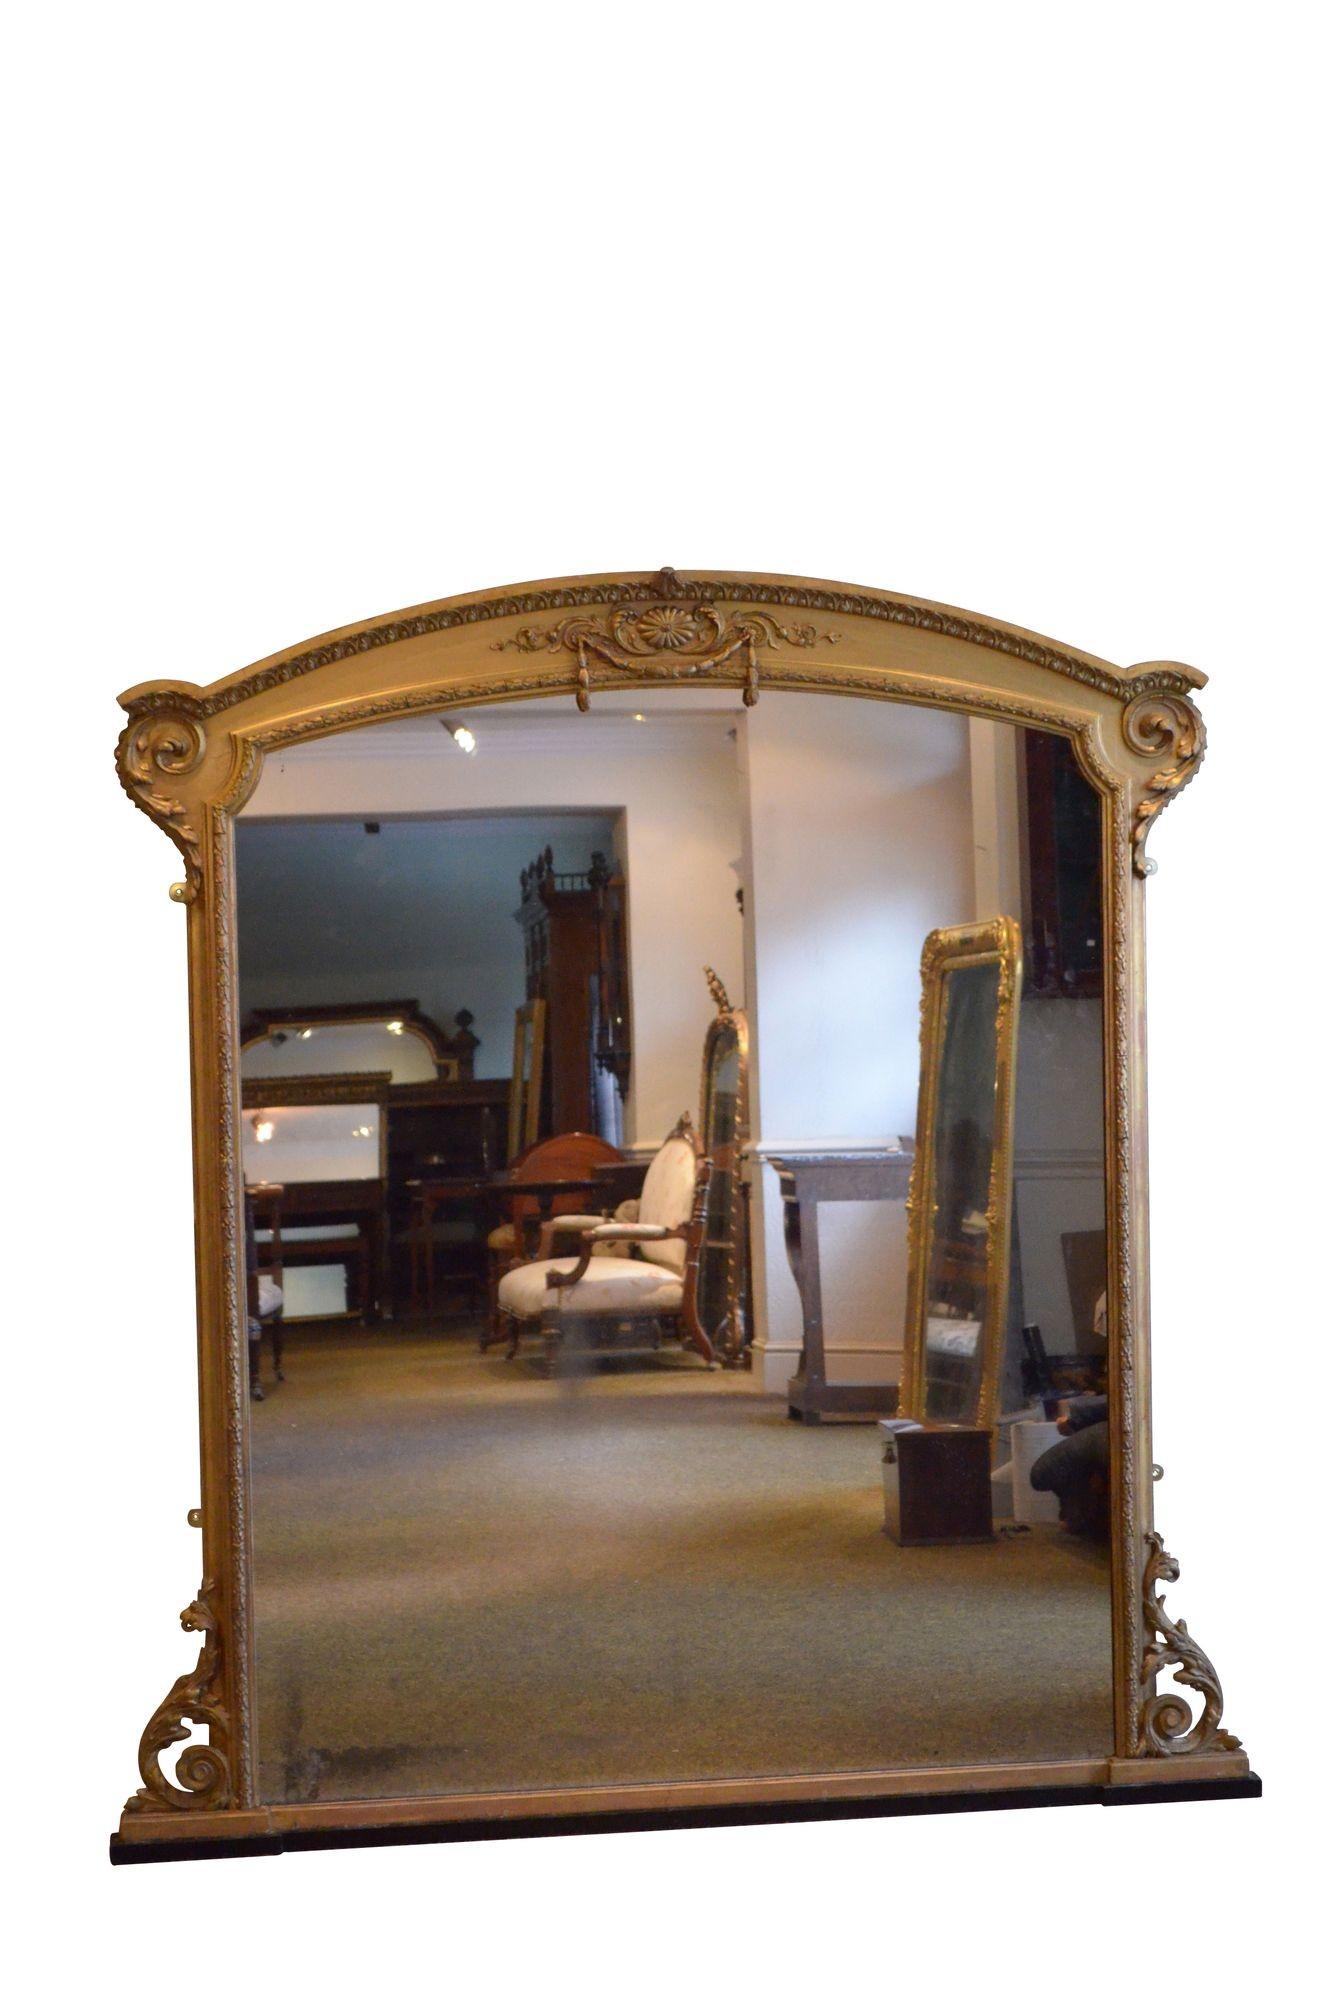 K0618 A Large Victorian Overmantel giltwood mirror or arched form, having original mercury glass with some foxing and desirable sparkle in gilded frame with moulded can finely carved cornice above floral frieze, decorative laurel leaf carving